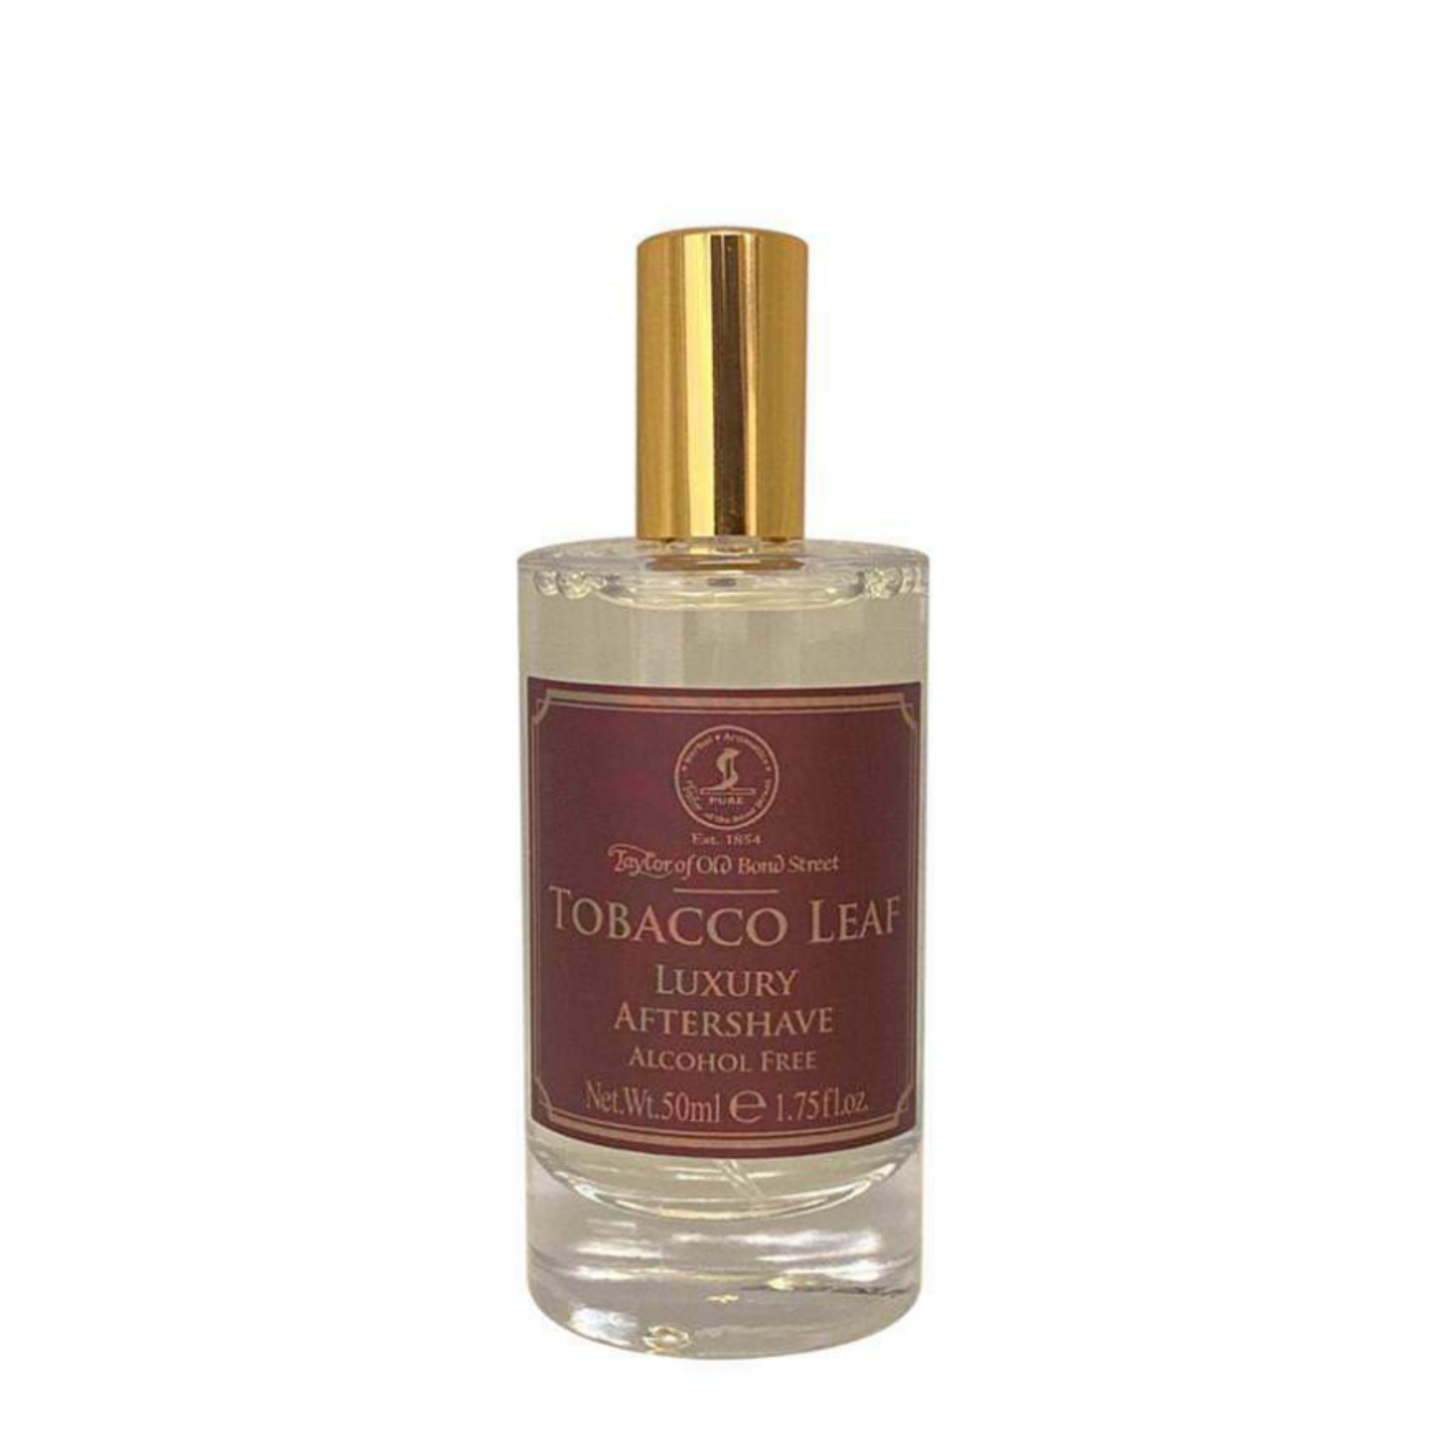 Primary image of Tobacco Leaf Luxury Aftershave Alcohol Free